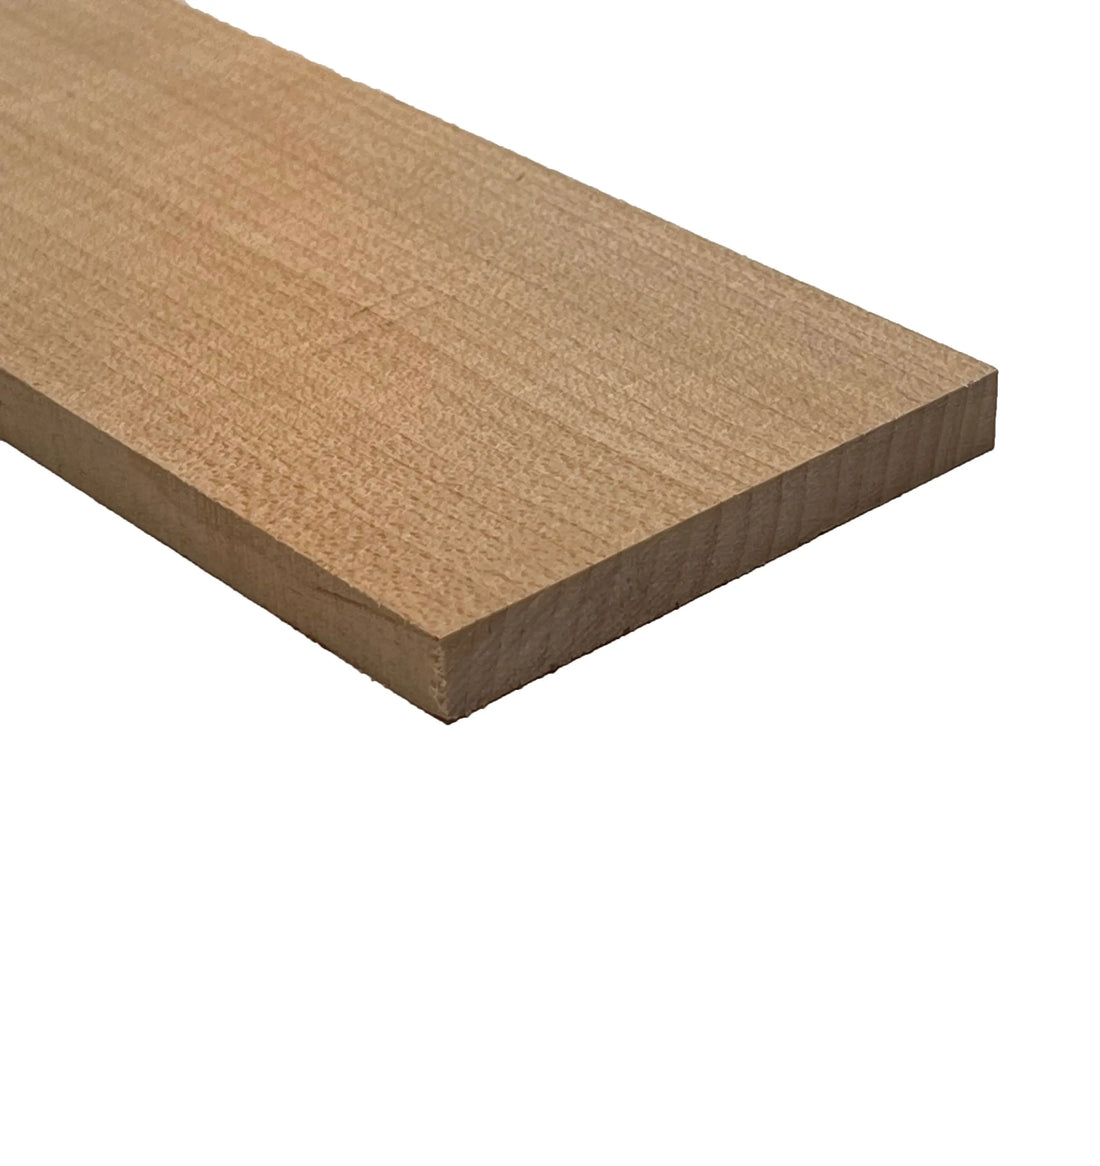 Thin Dimensional Lumber – Exotic Wood Zone